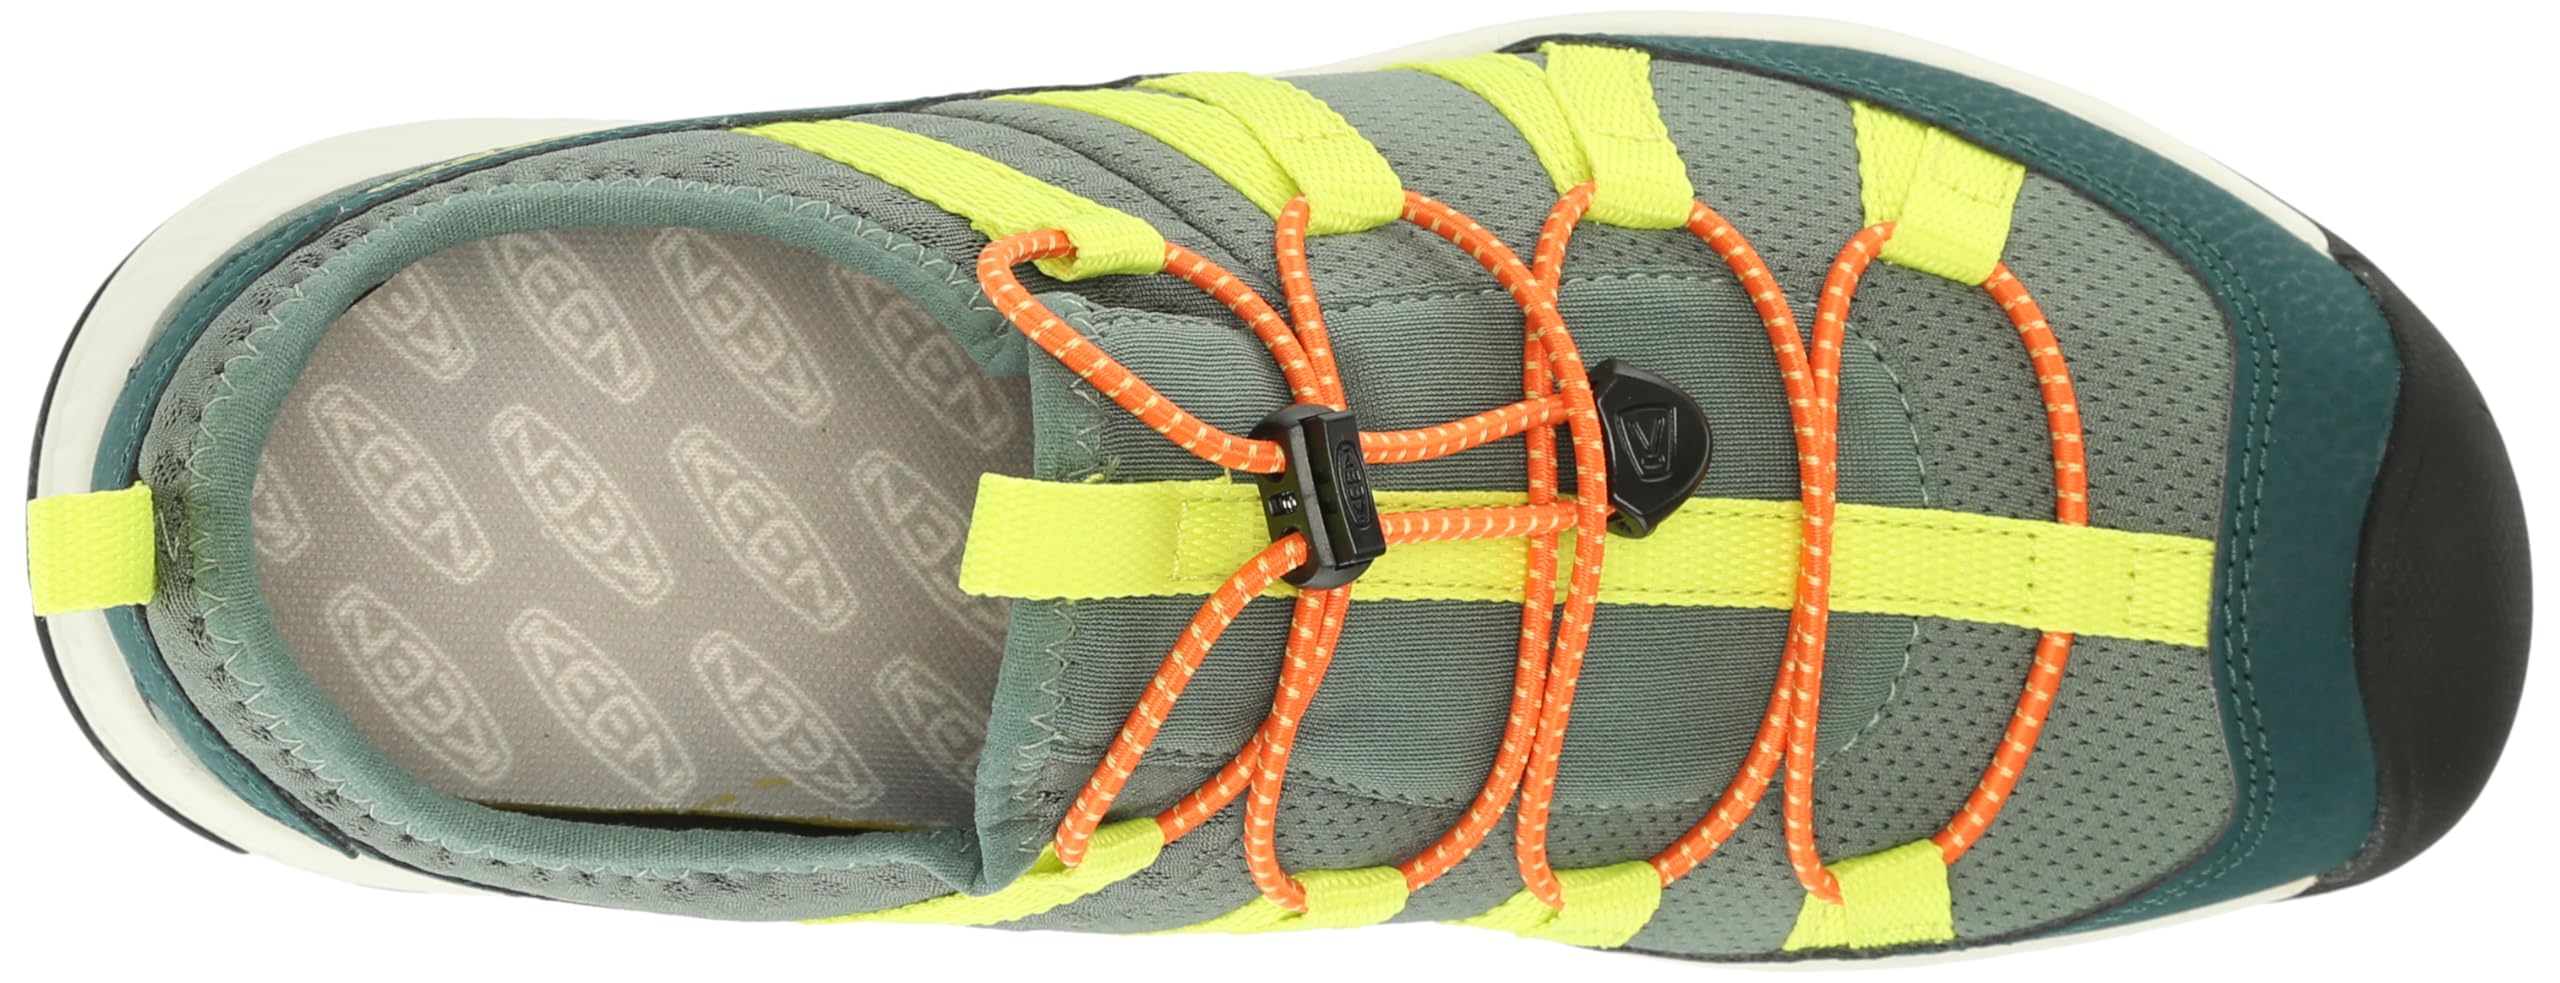 KEEN Unisex-Child Motozoa Comfortable Easy on Breathable Lightweight Athletic Sneakers